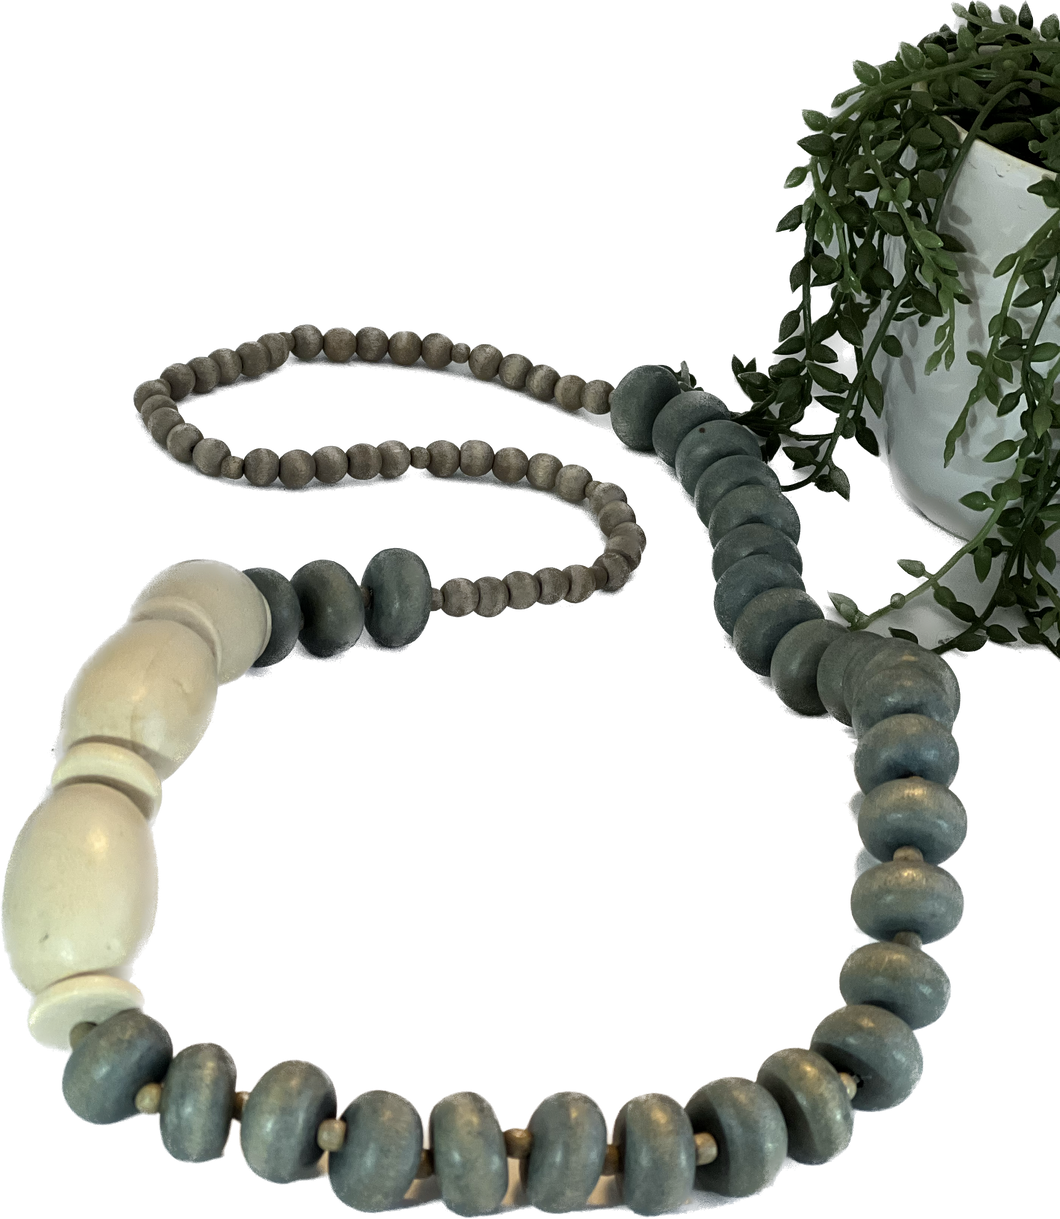 Long beaded Necklace Featuring Large Natural Beads.